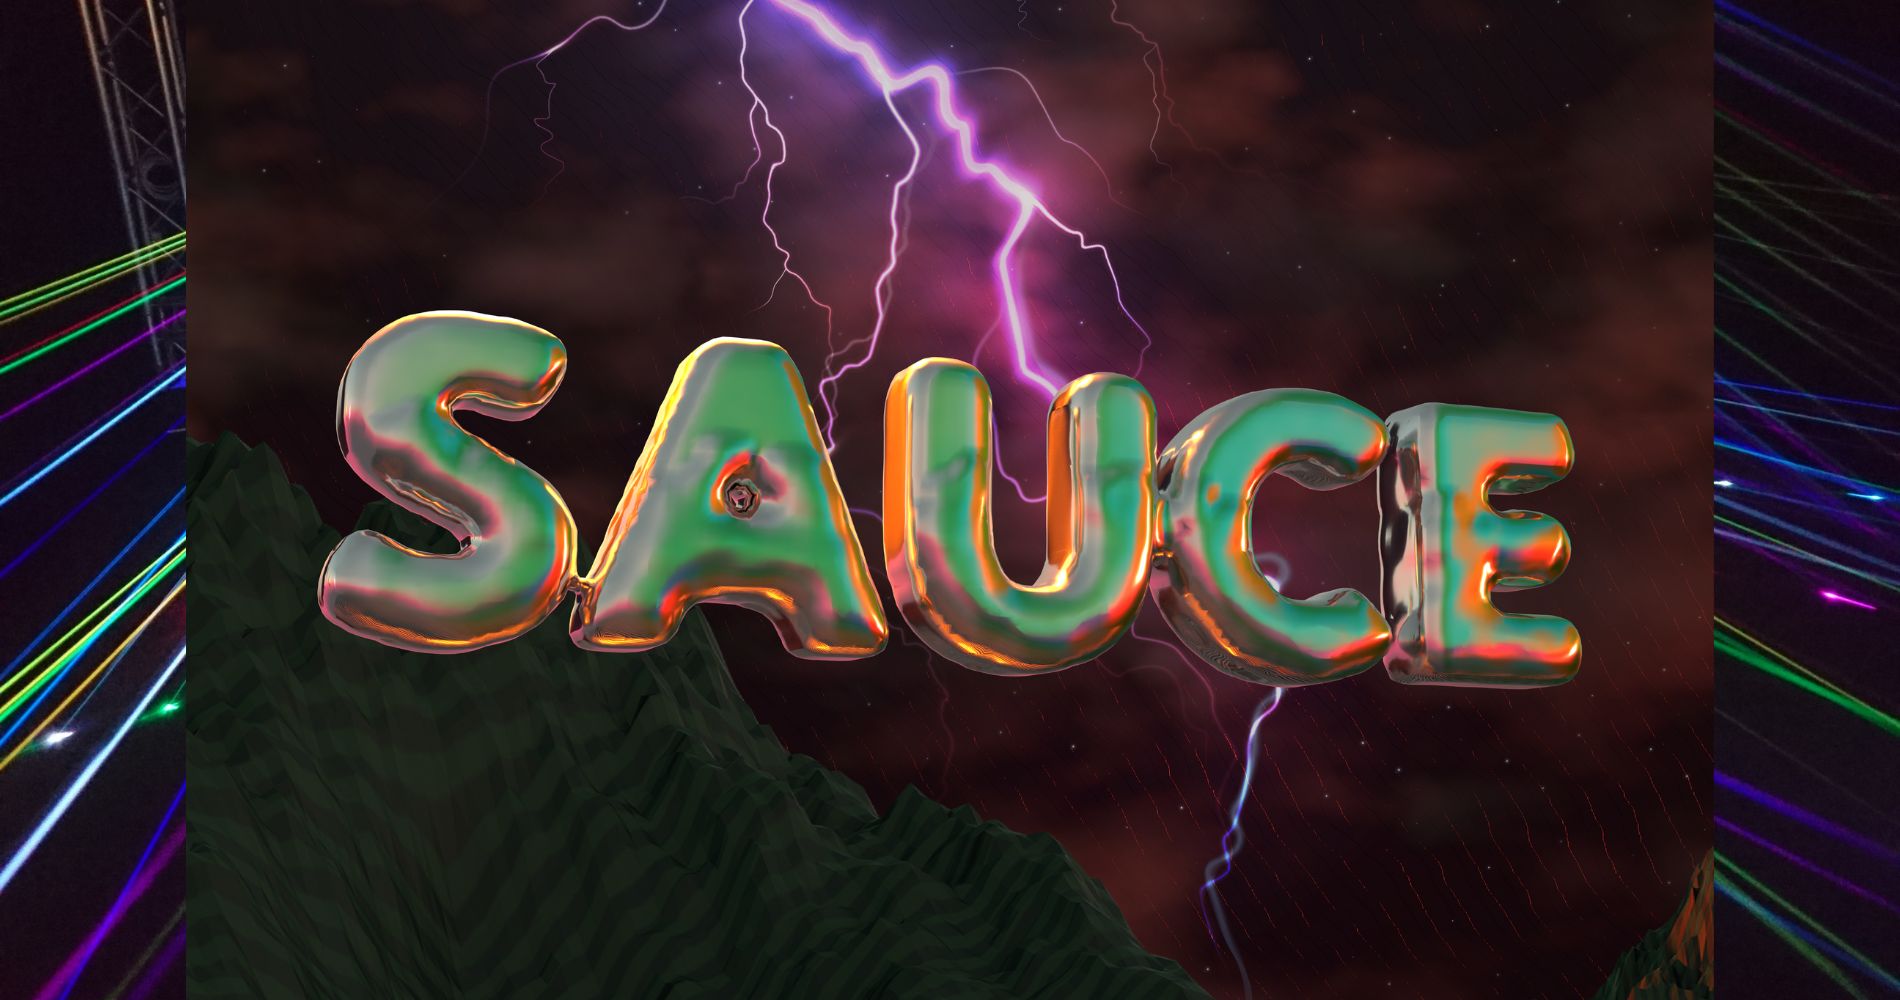 SAUCE by SOCIAL is back! And it’s bigger with a